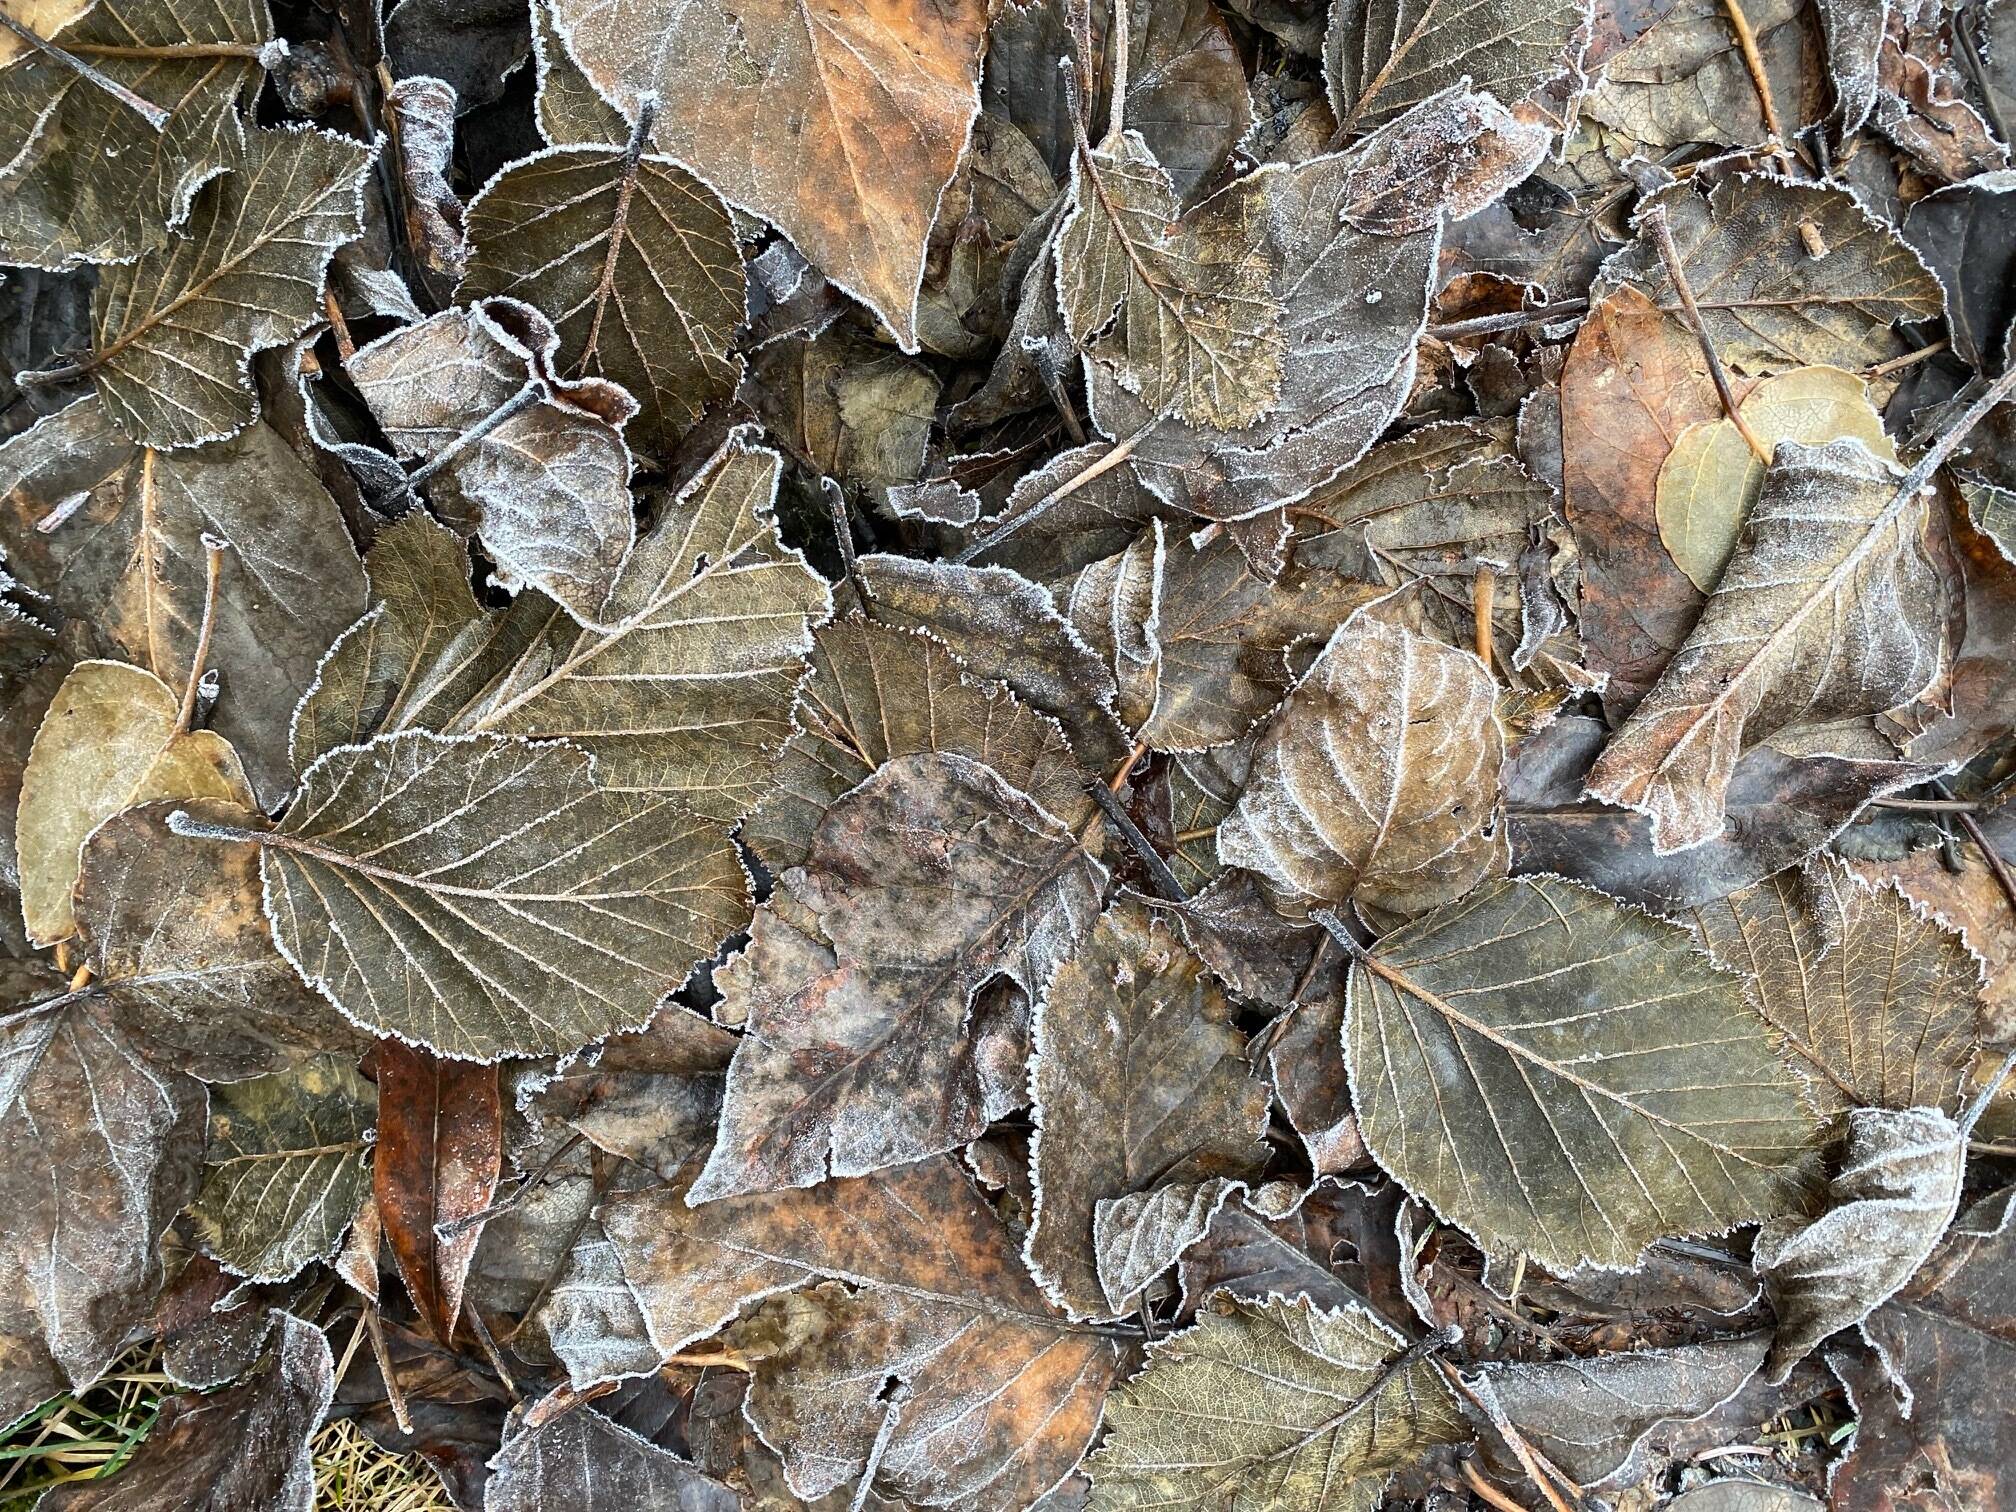 A collection of leaves outlined in frost lie huddled together along East Glacier Trail on Nov. 29. (Photo by Denise Carroll)